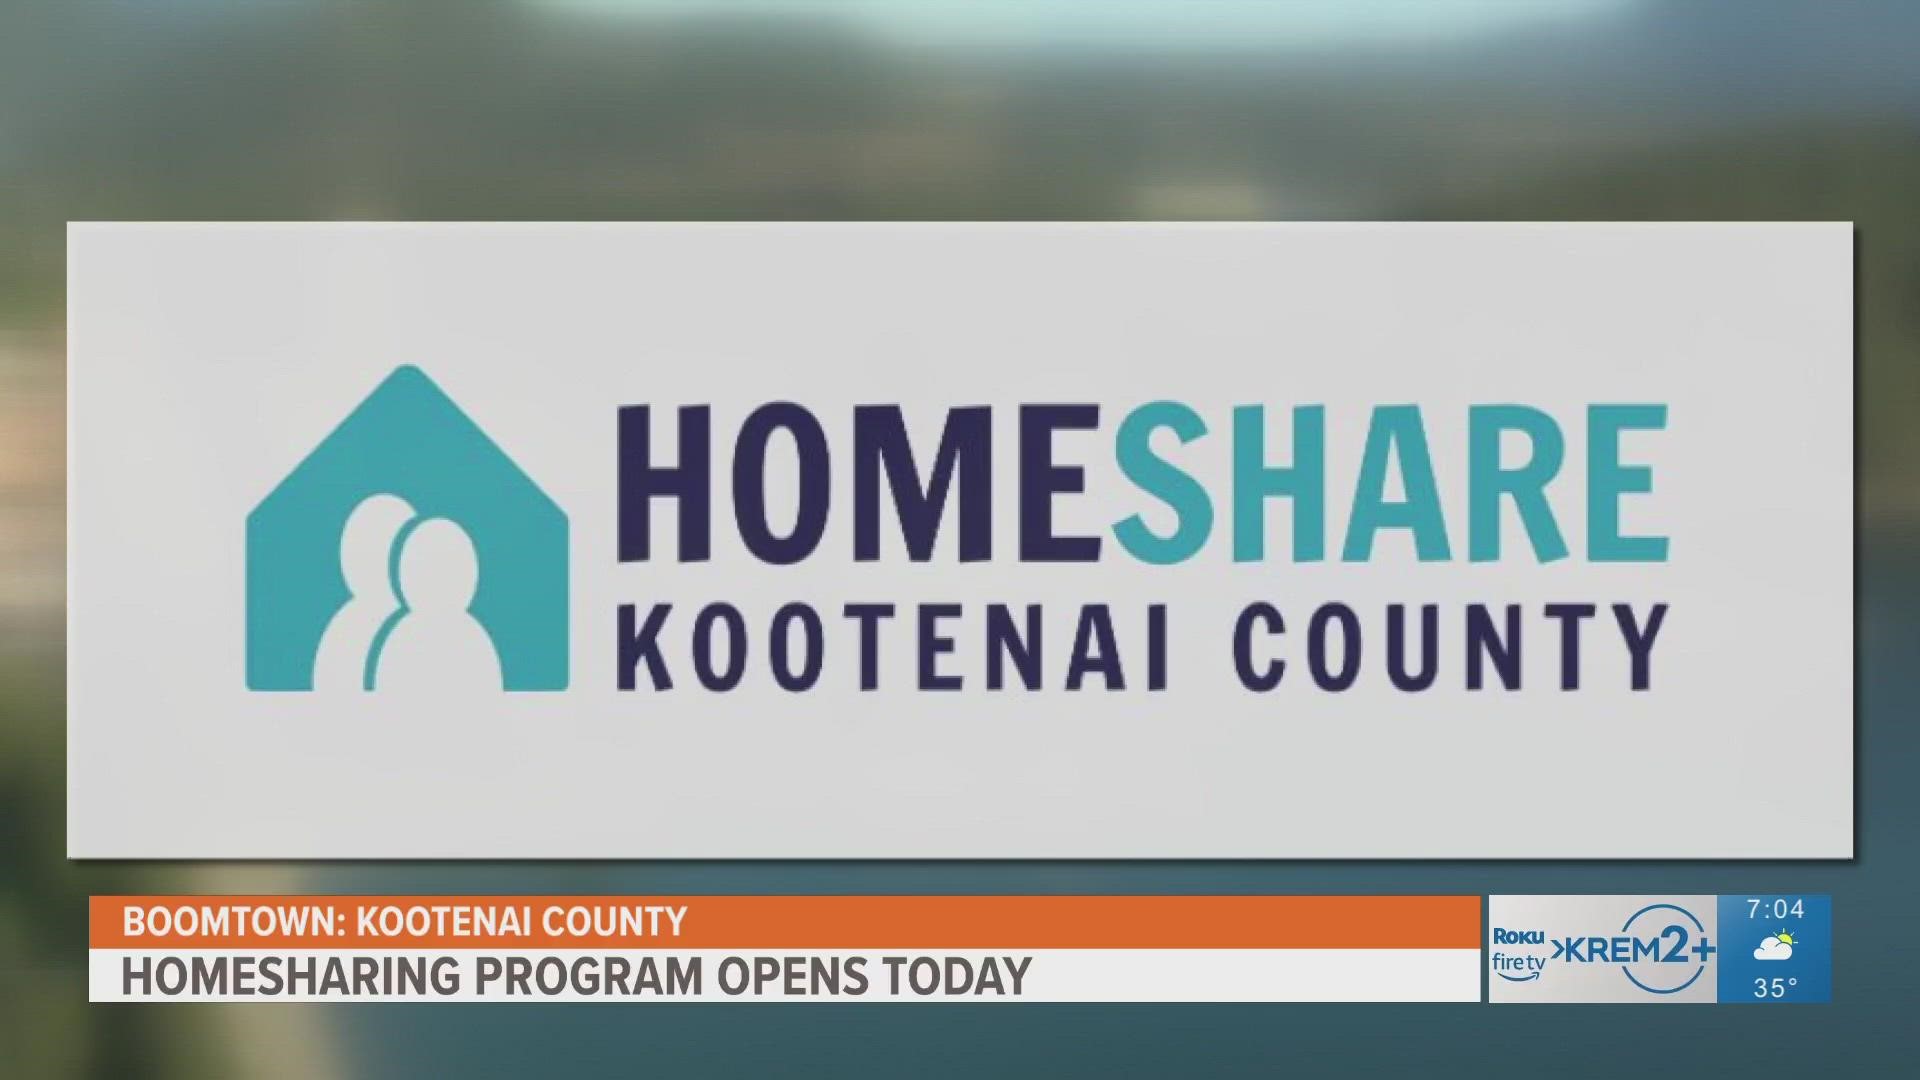 Homeshare Kootenai County is now accepting applications.